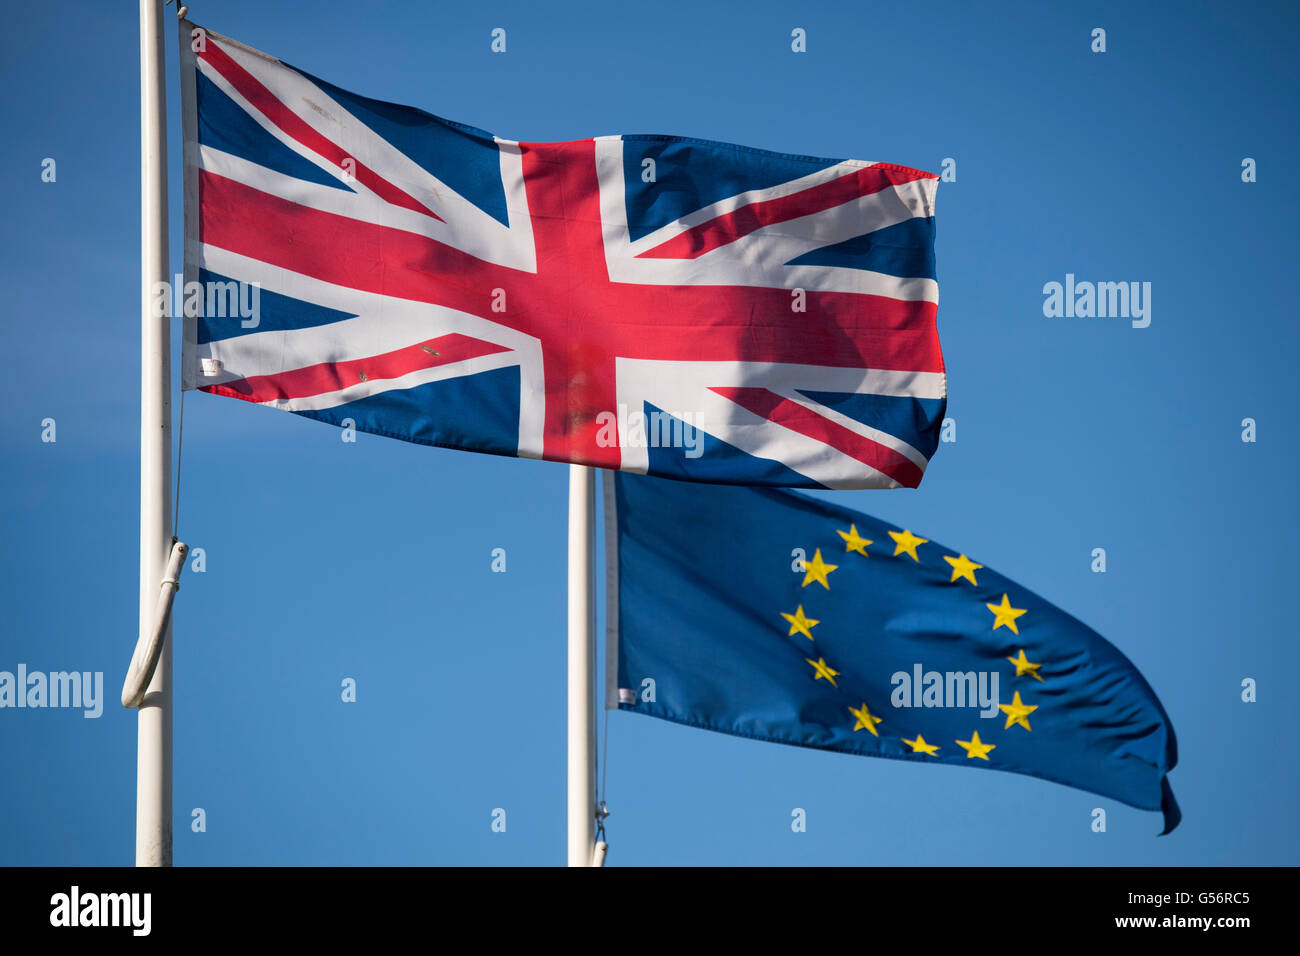 Cardiff, UK. 21st June, 2016. The national flag of the United Kingdom the Union Jack flag and the  European Union flag outside City Hall in Cardiff, South Wales. Britain goes to the polls for a referendum to decide on its continued EU membership on June 23.  Credit:  Matthew Horwood / Alamy Live News Stock Photo